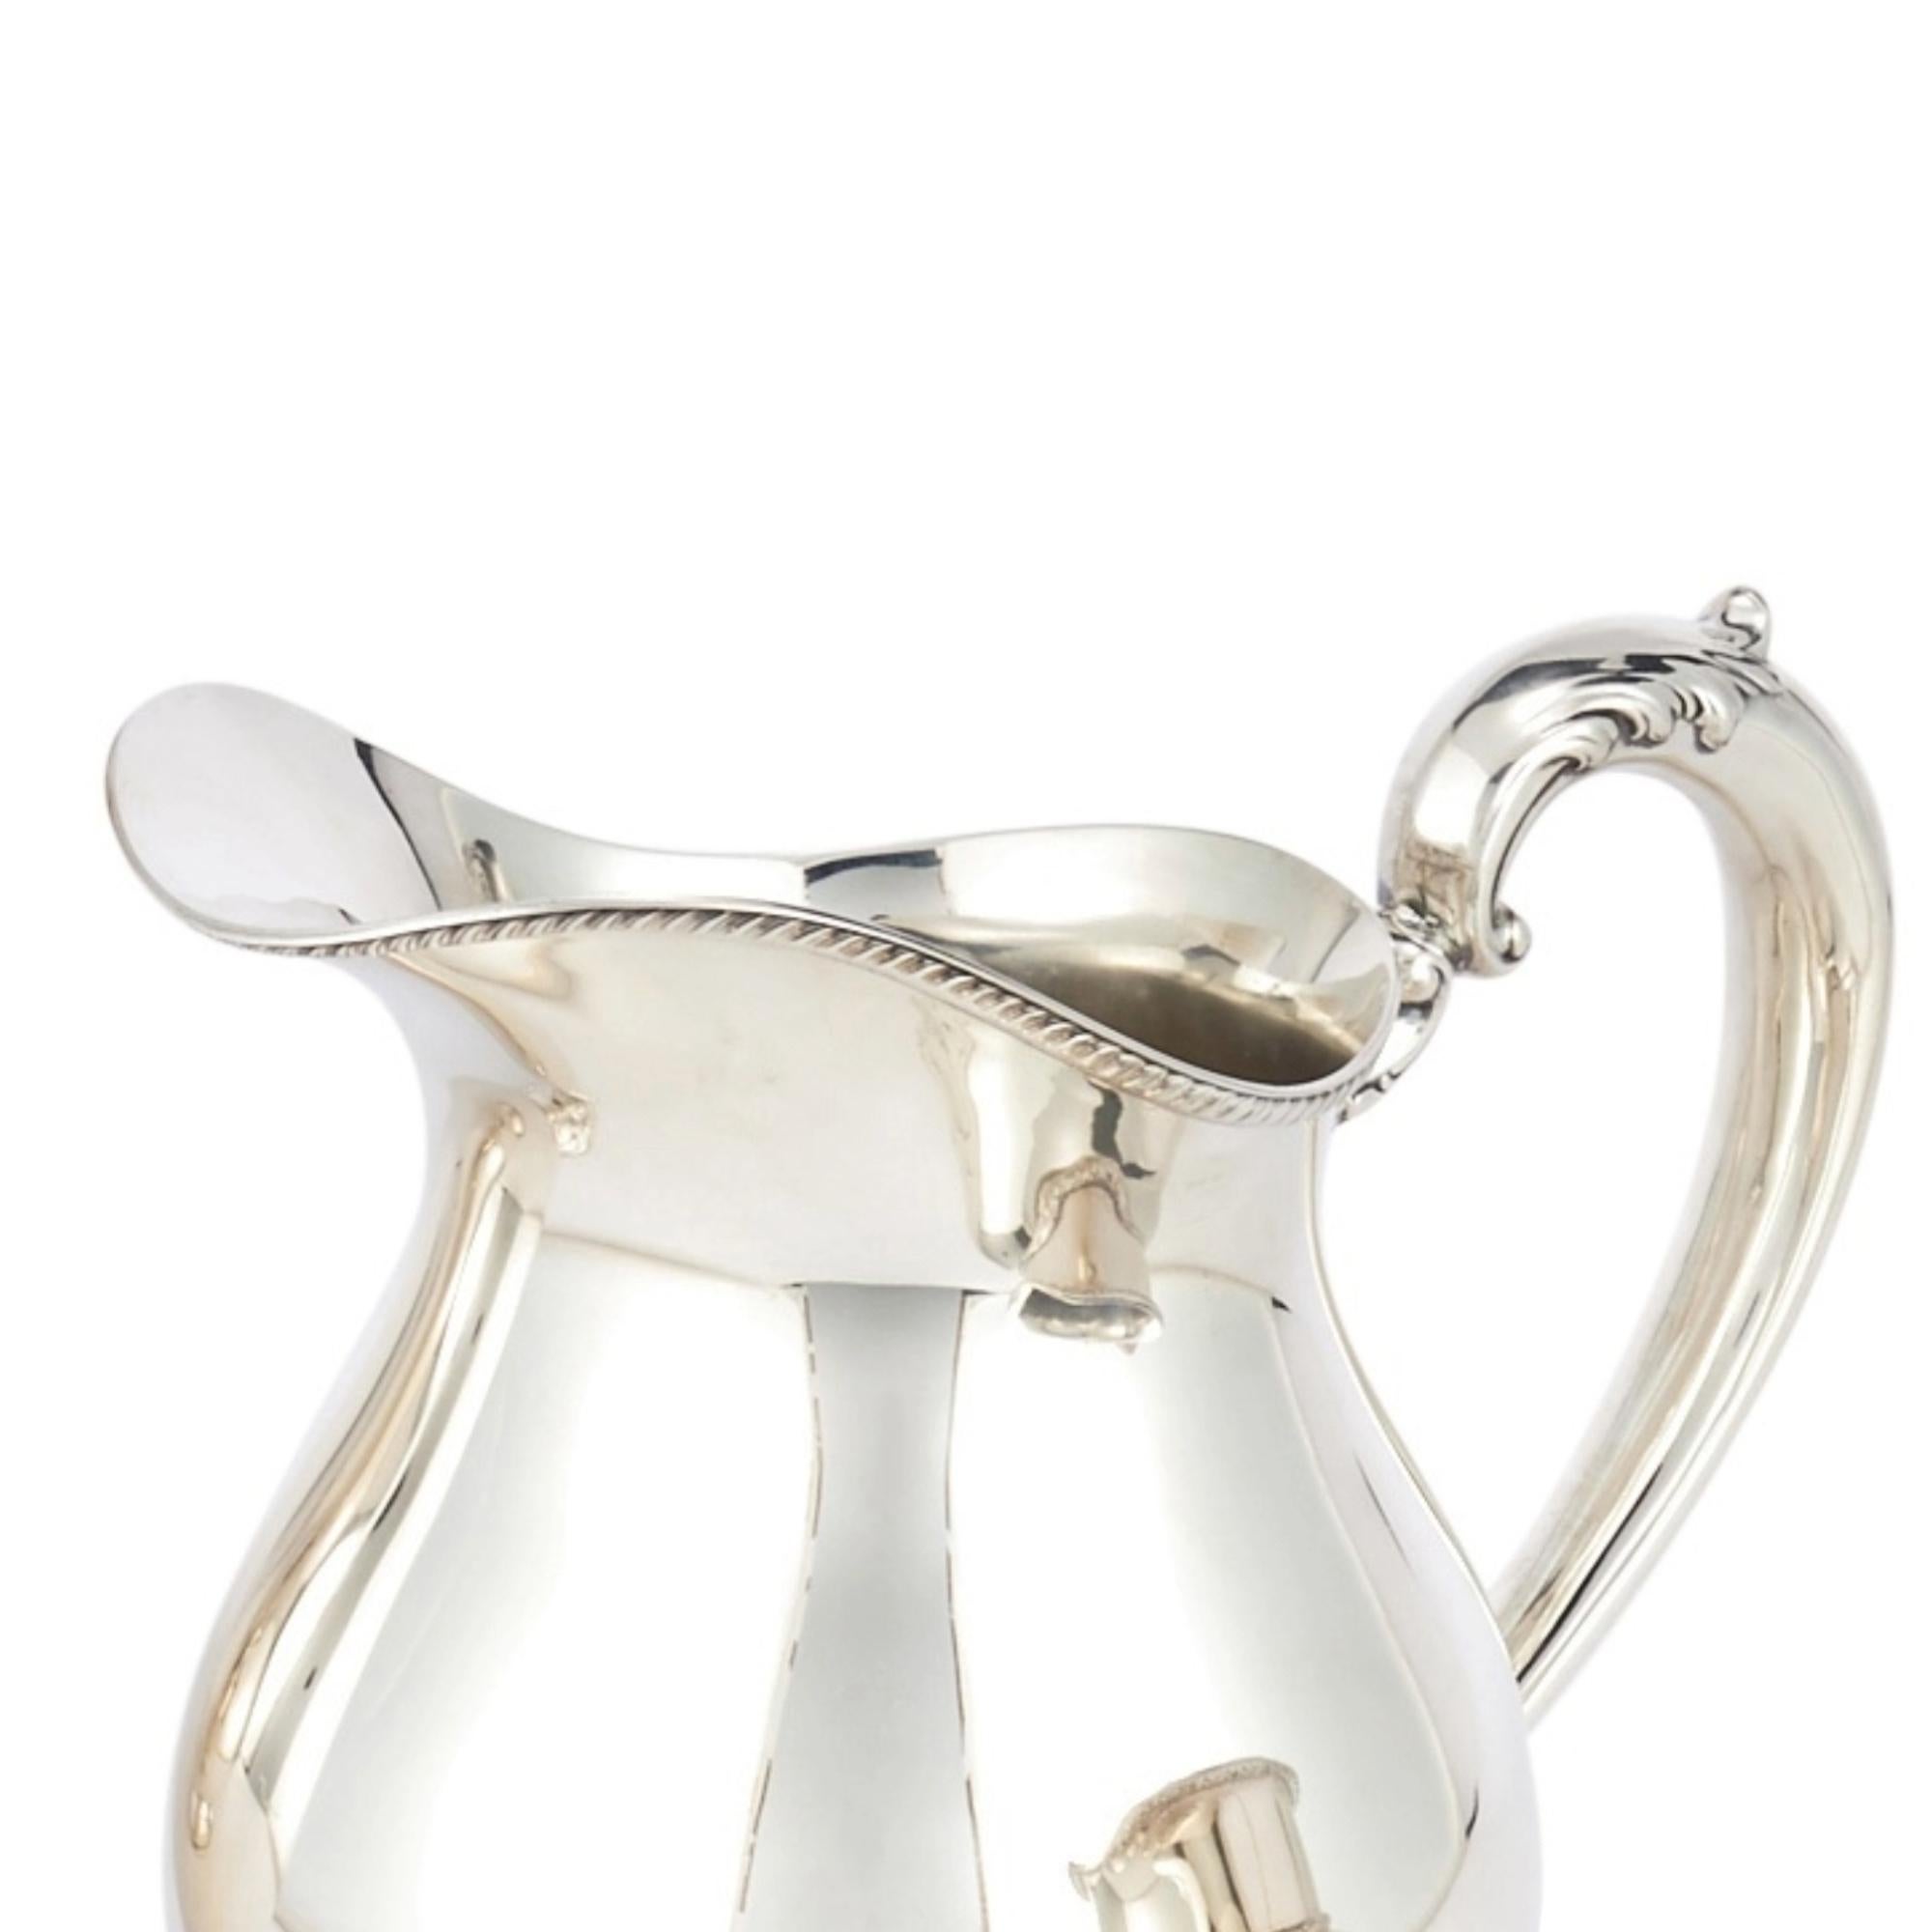 Mid-20th Century North American Sterling Silver Tableware Serveware Pitcher For Sale